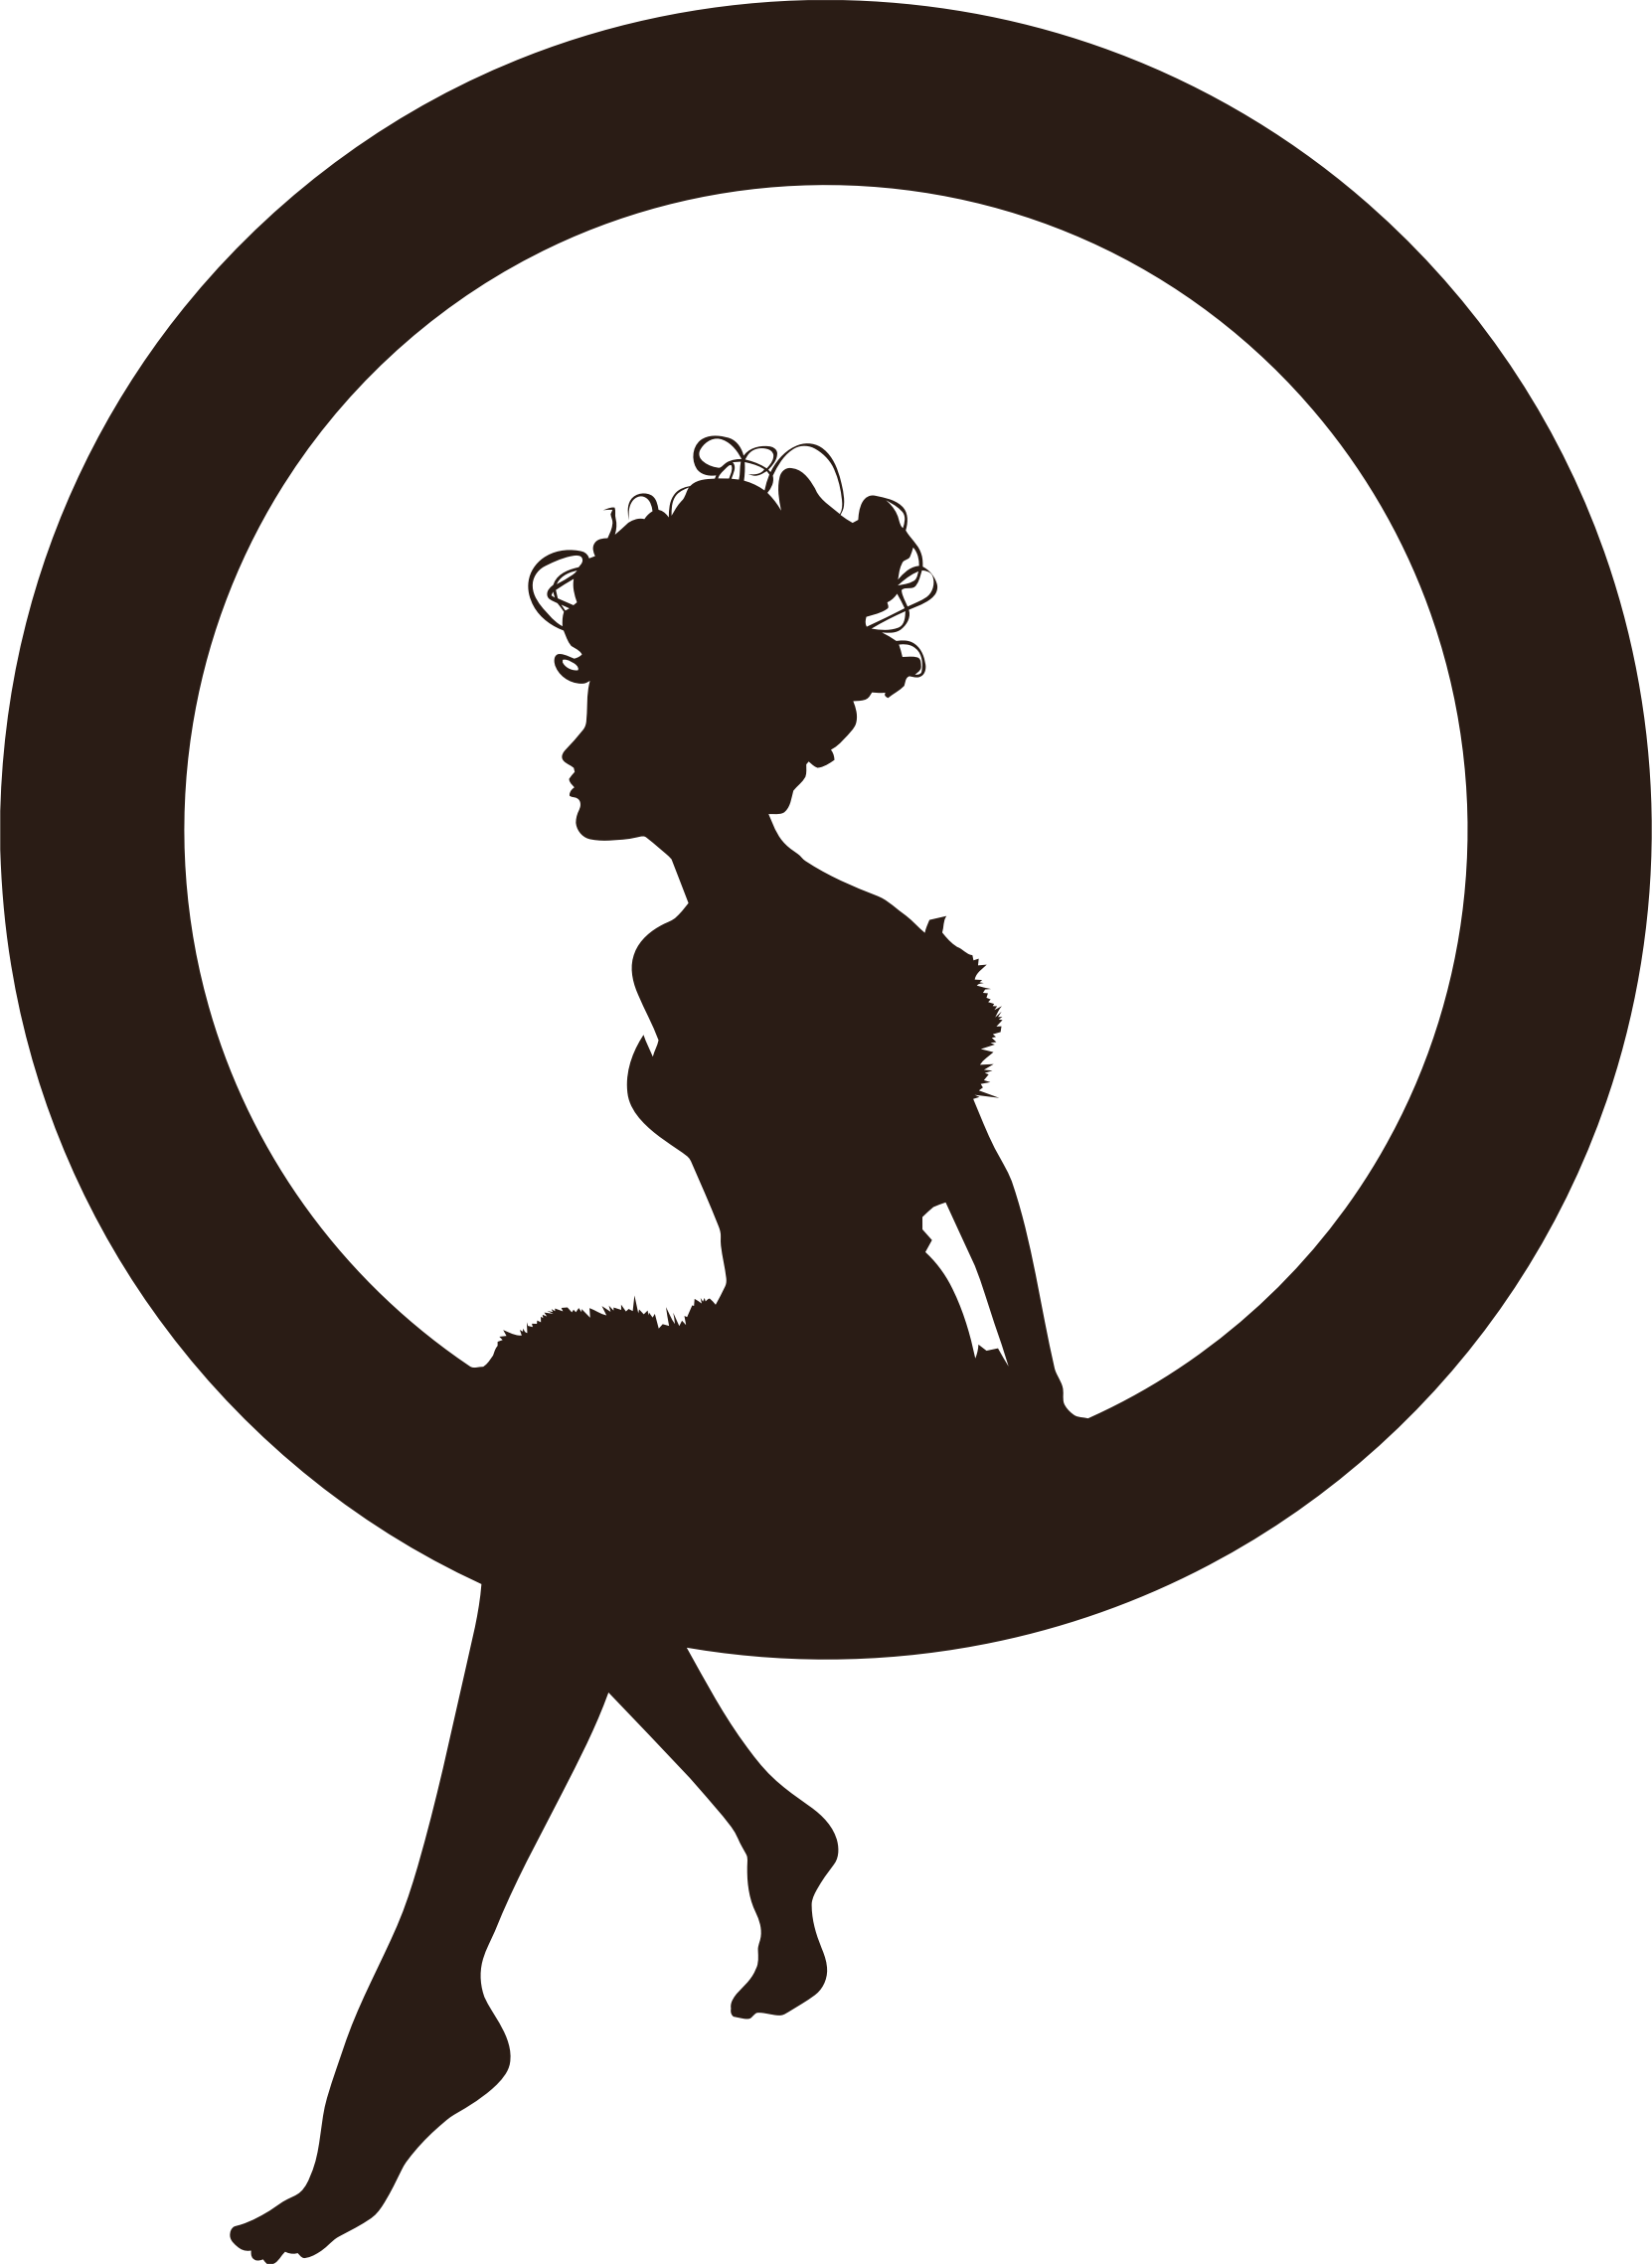 Label clipart silhouette. Circle at getdrawings com